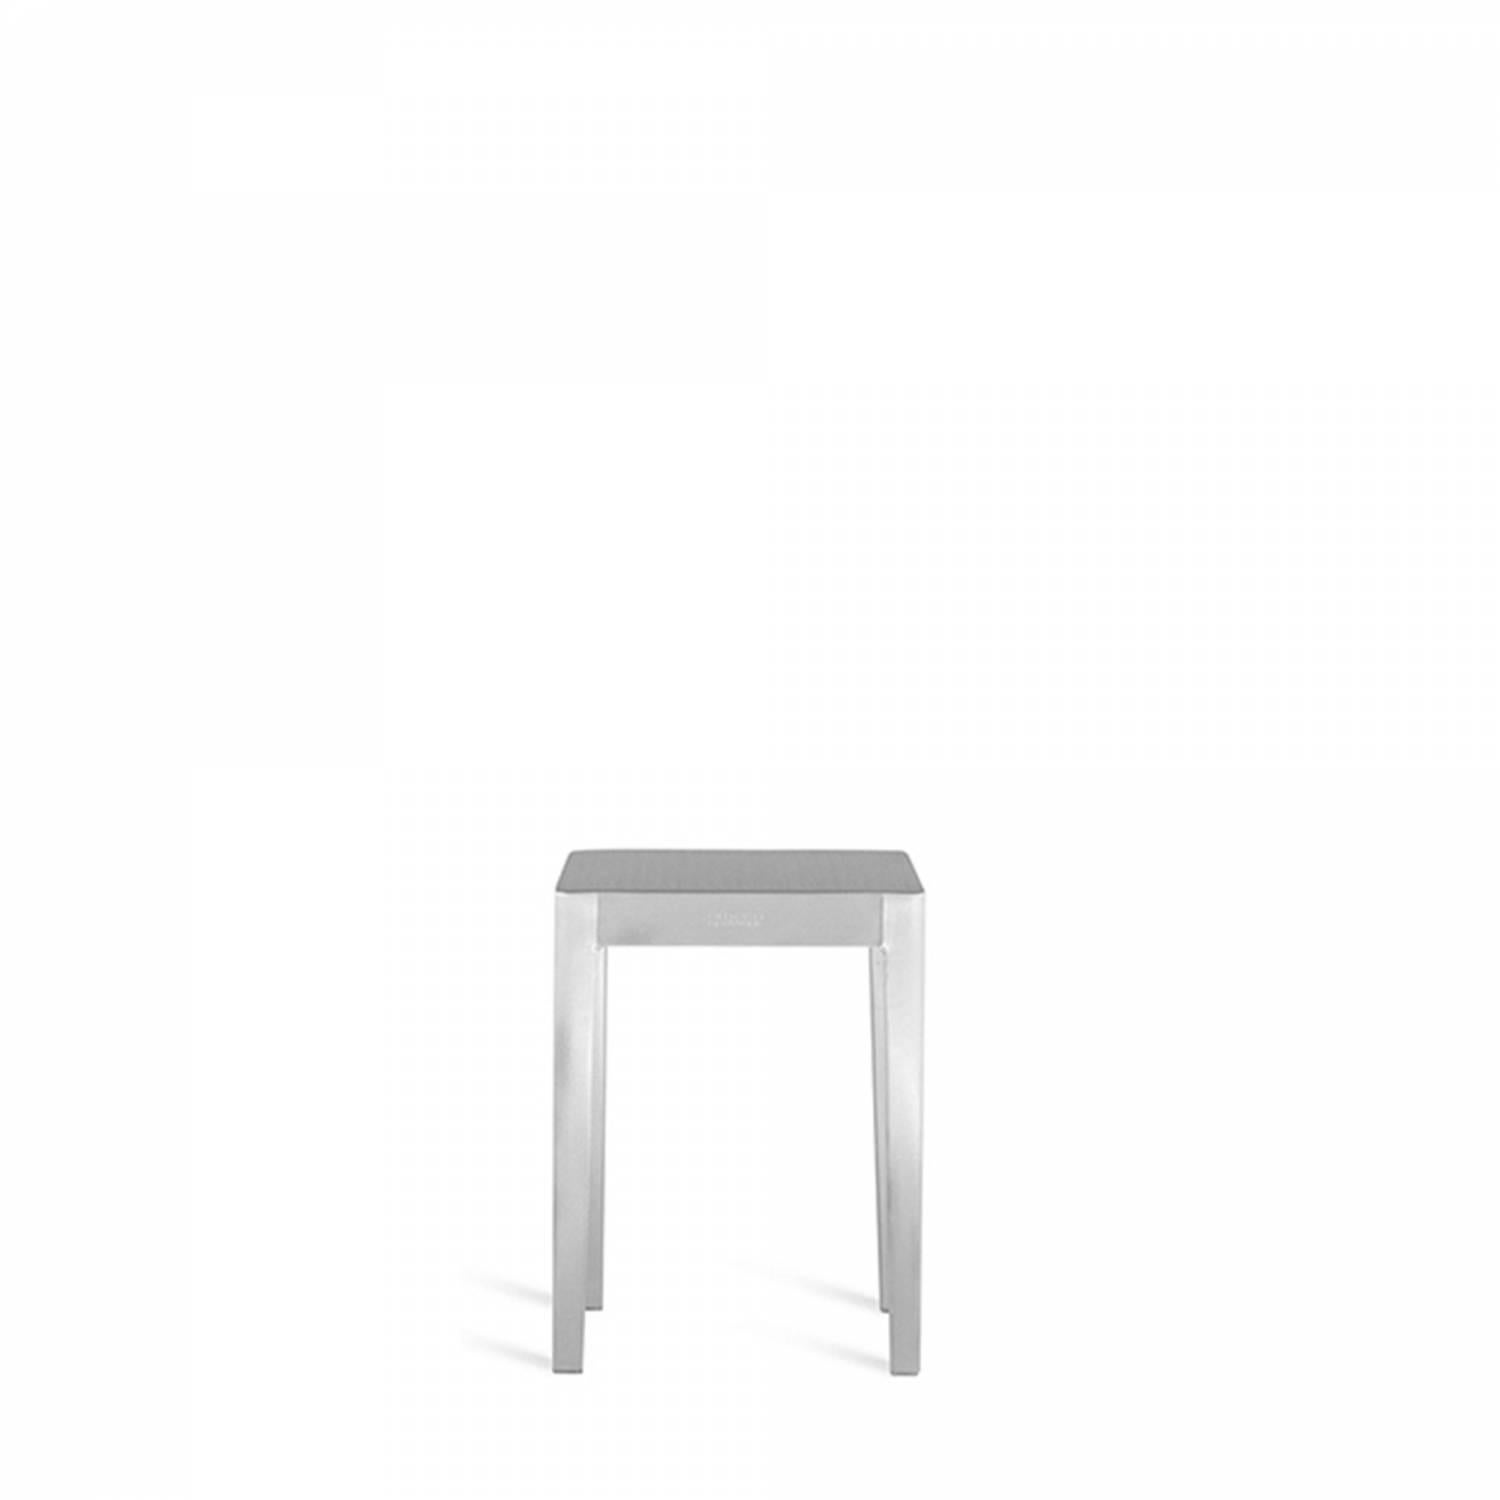 Emeco occasional table in brushed recycled aluminum designed by Phillipe Starck as a collaboration with the world-renown designer and Emeco.

Product dimensions: Width 14